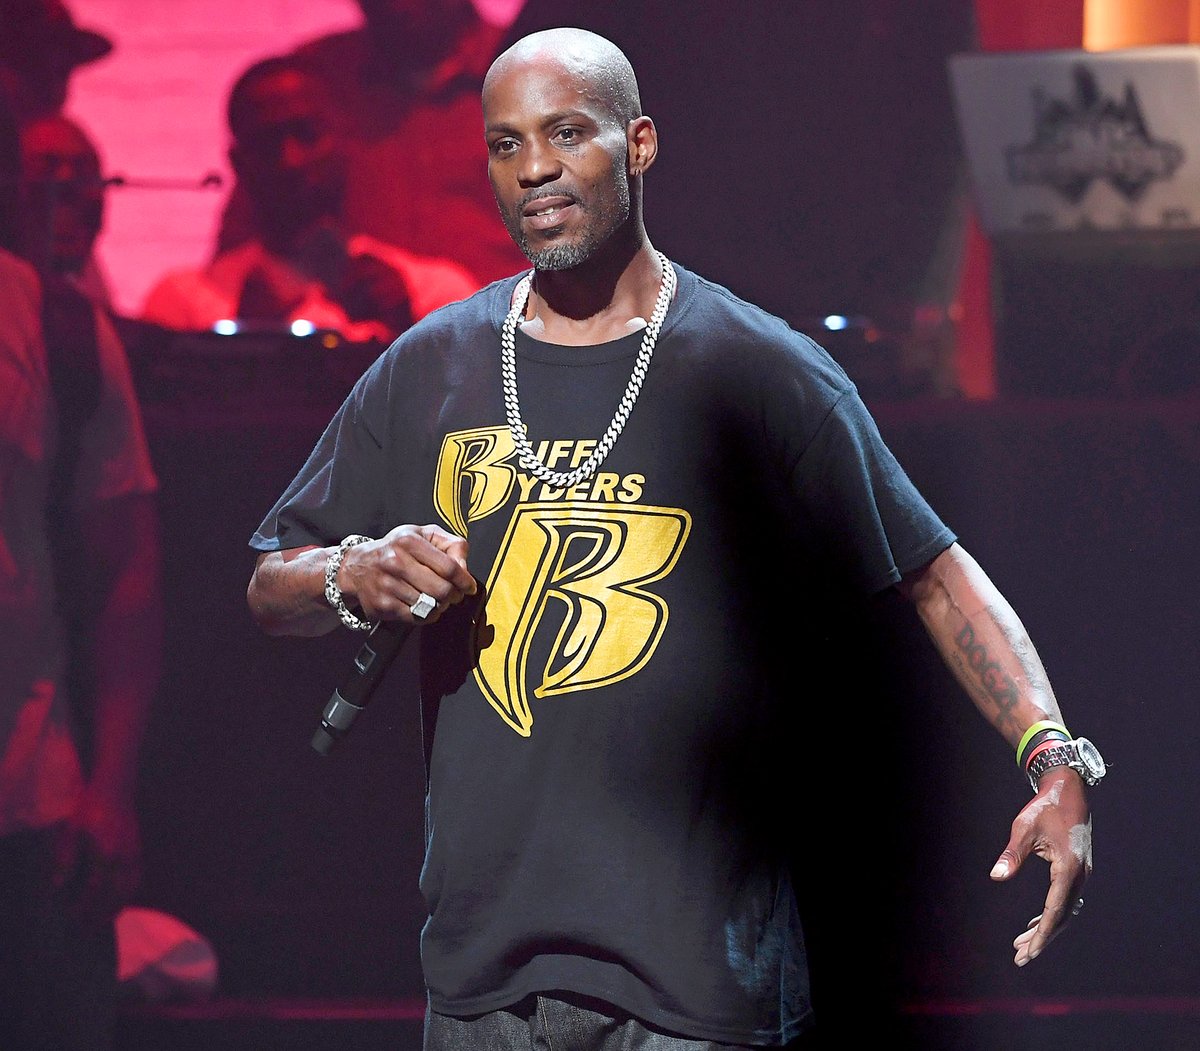 Ruff Ryders foudners, the Dean Family, learned about DMX through Heavy D. X had already earned a reputation as a fearless battle MC that caught Heavy's attention.